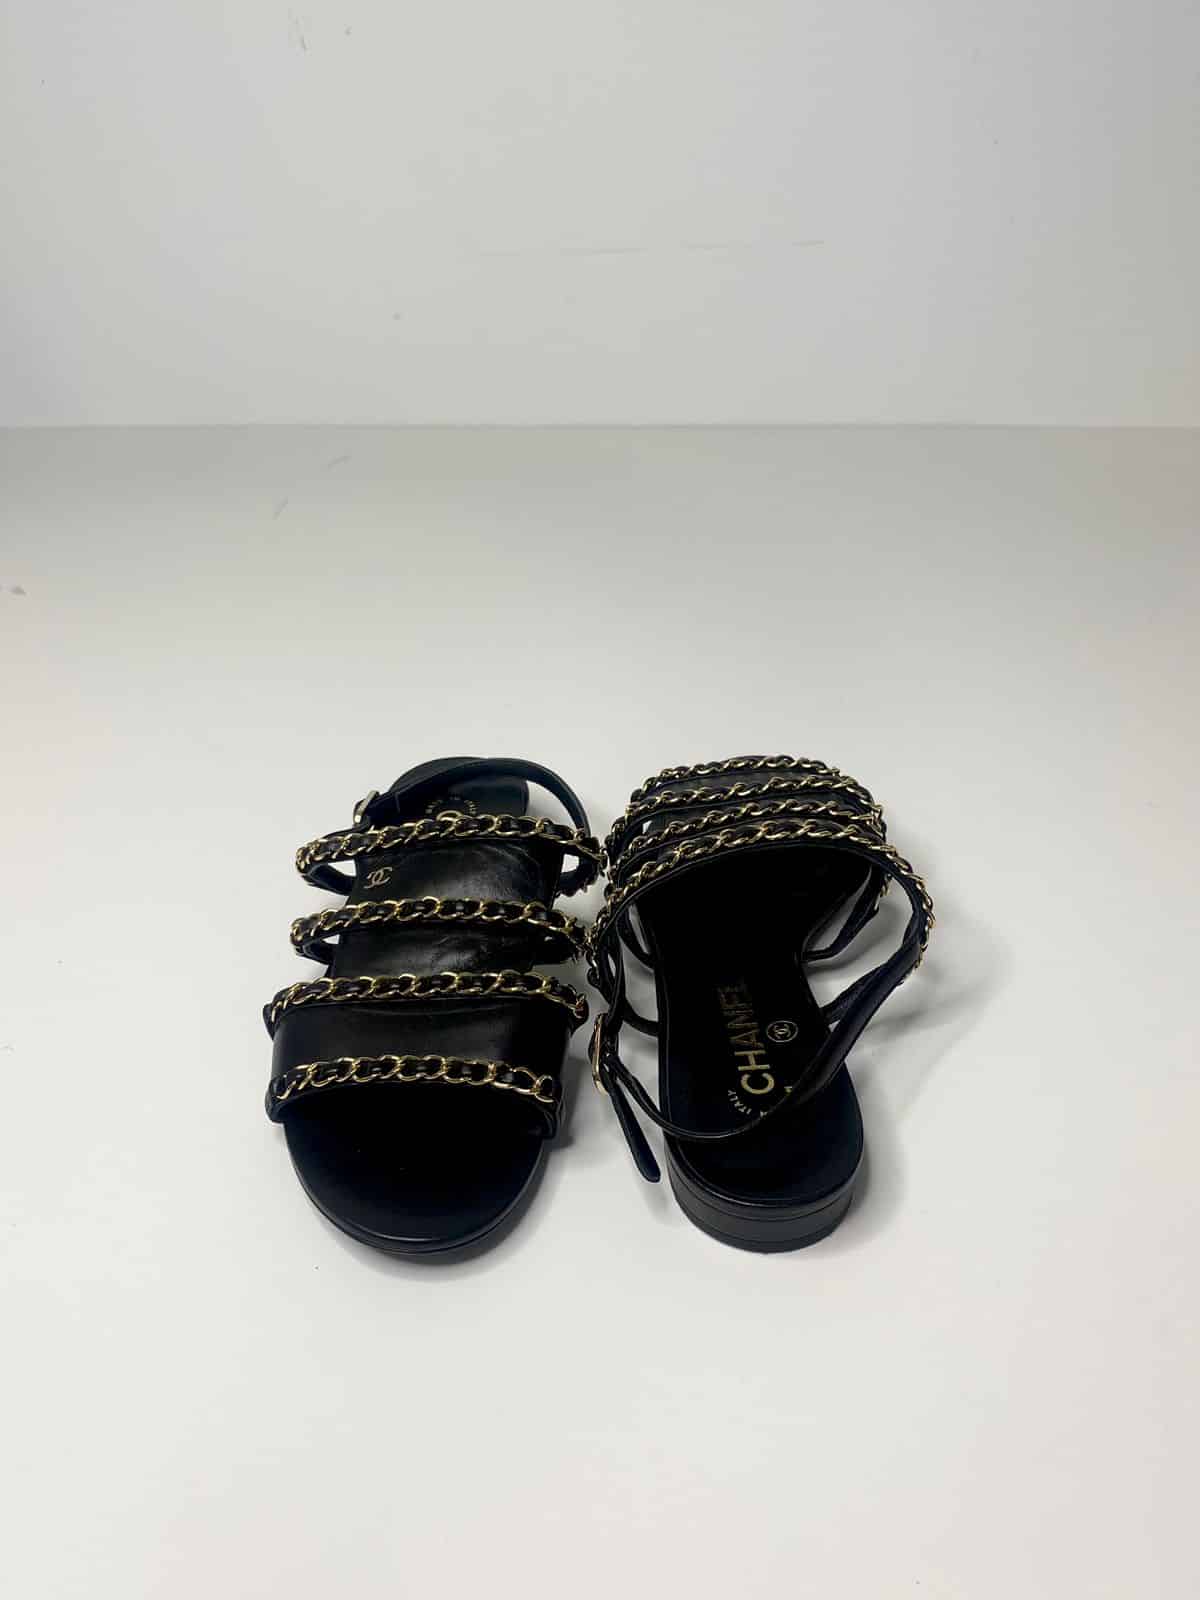 Chanel Black Leather Chain Slingback Sandals Size 37EU - The